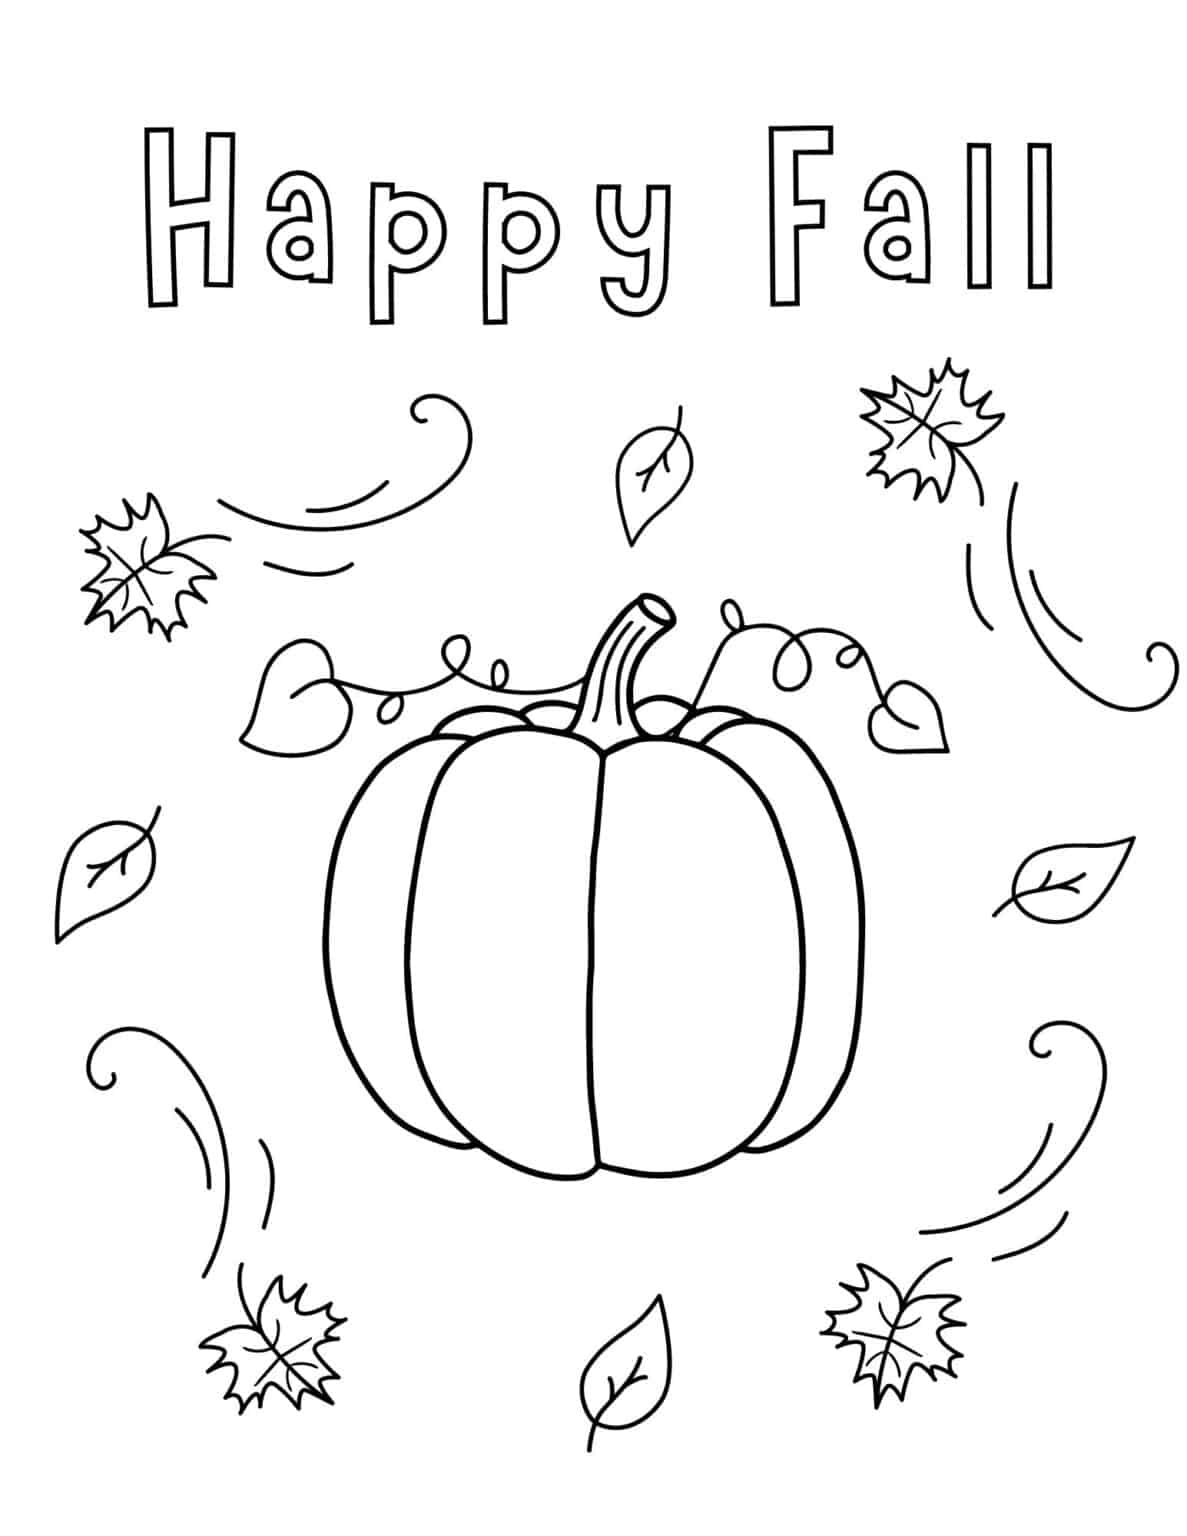 Free Pumpkin Coloring Pages - Prudent Penny Pincher